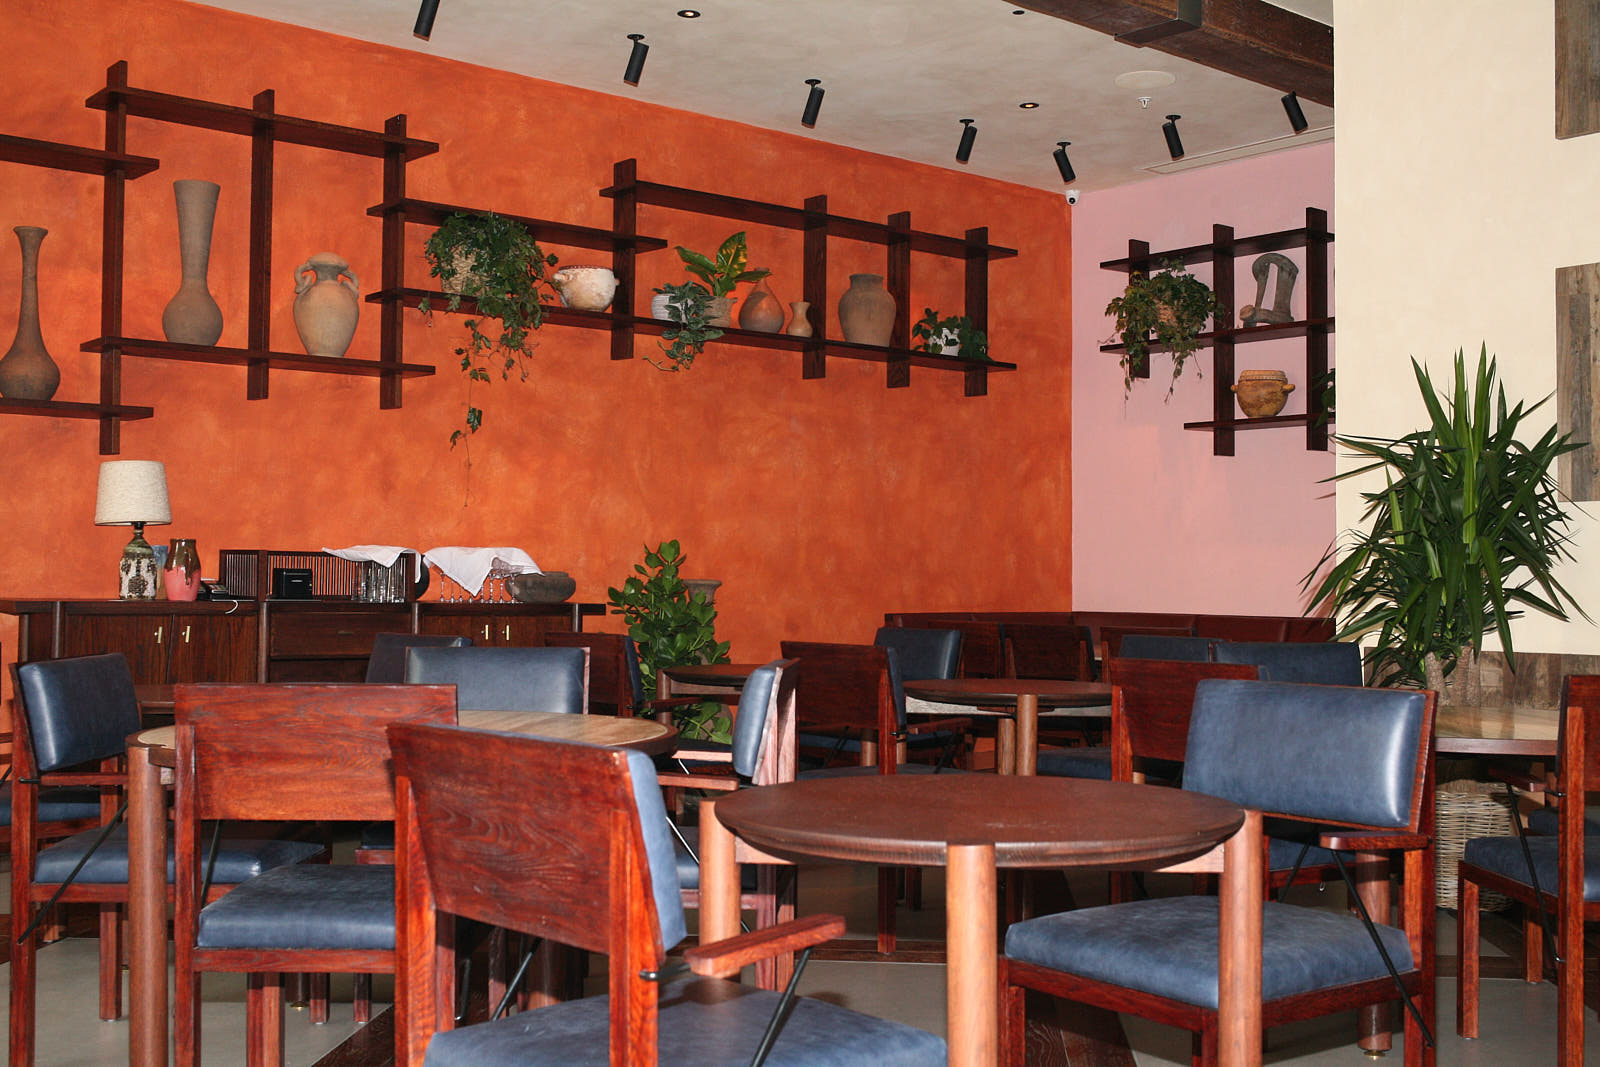 Inside Kol, with an earthy toned dining room design complete with Mexican ceramics on wooden shelves on the walls